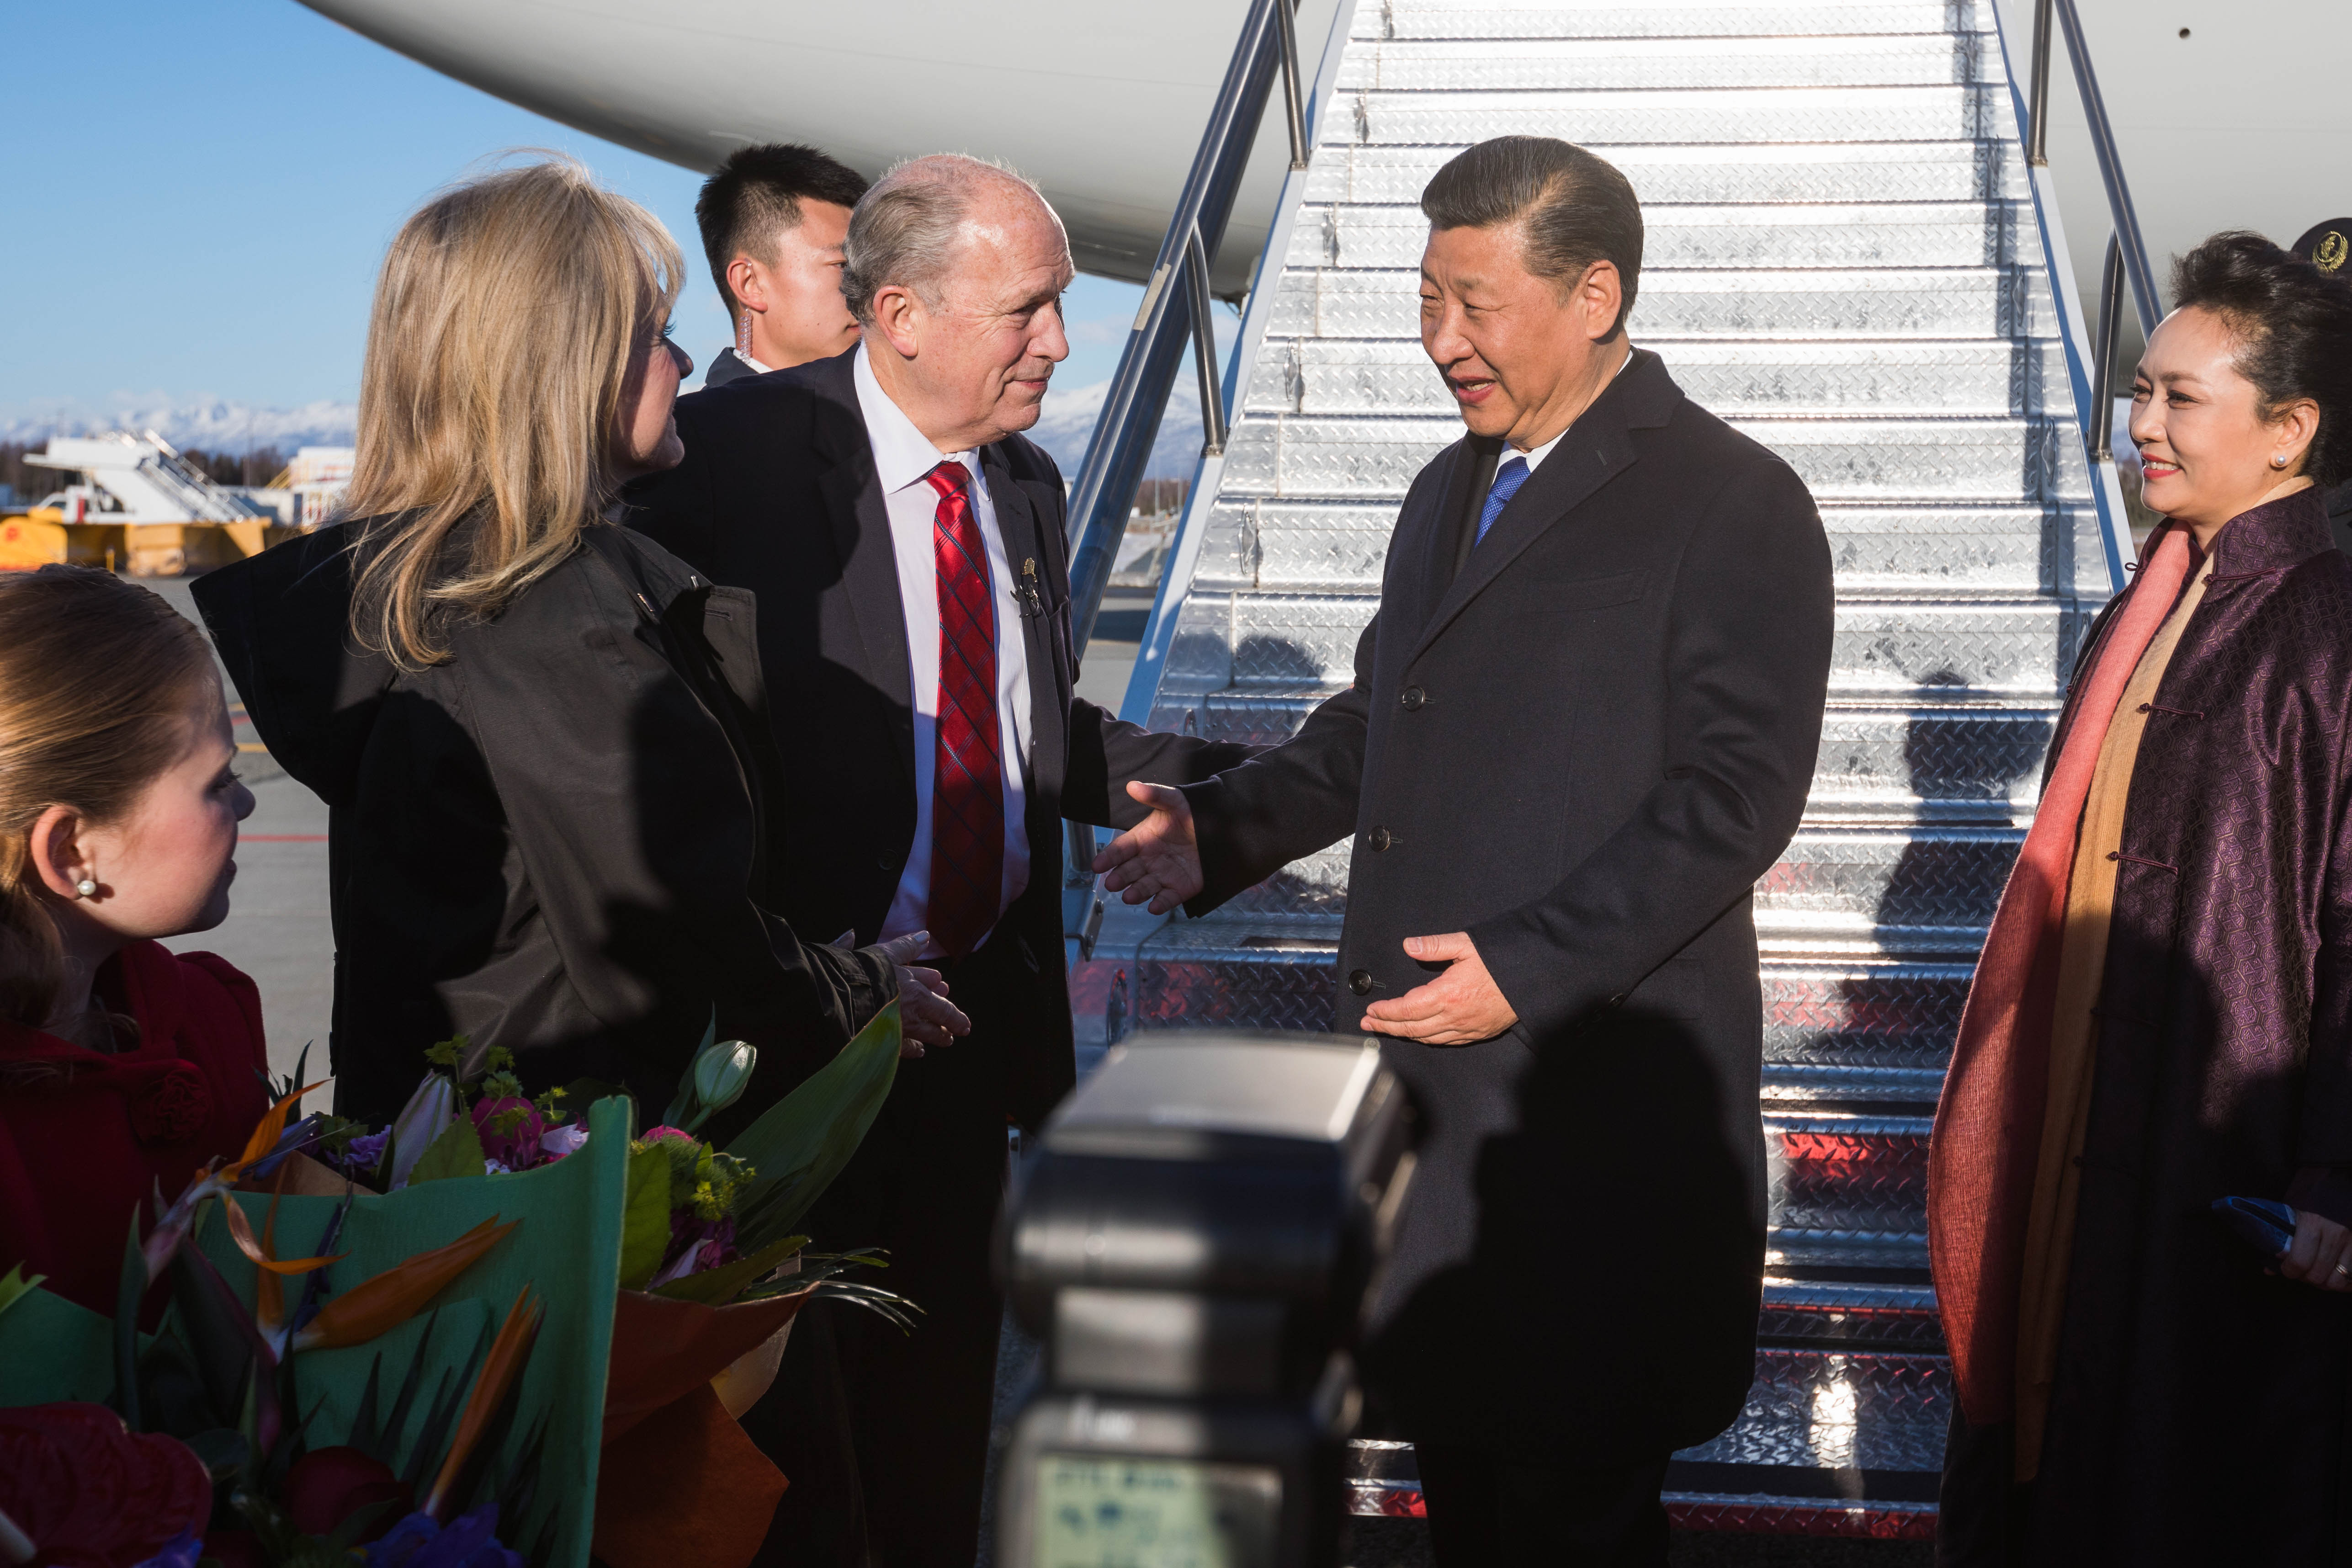 Gov. Bill Walker greets Chinese President Xi Jinping and his wife Peng Liyuan after they landed in Anchorage Friday, April 7, 2017. (Loren Holmes / Alaska Dispatch News)